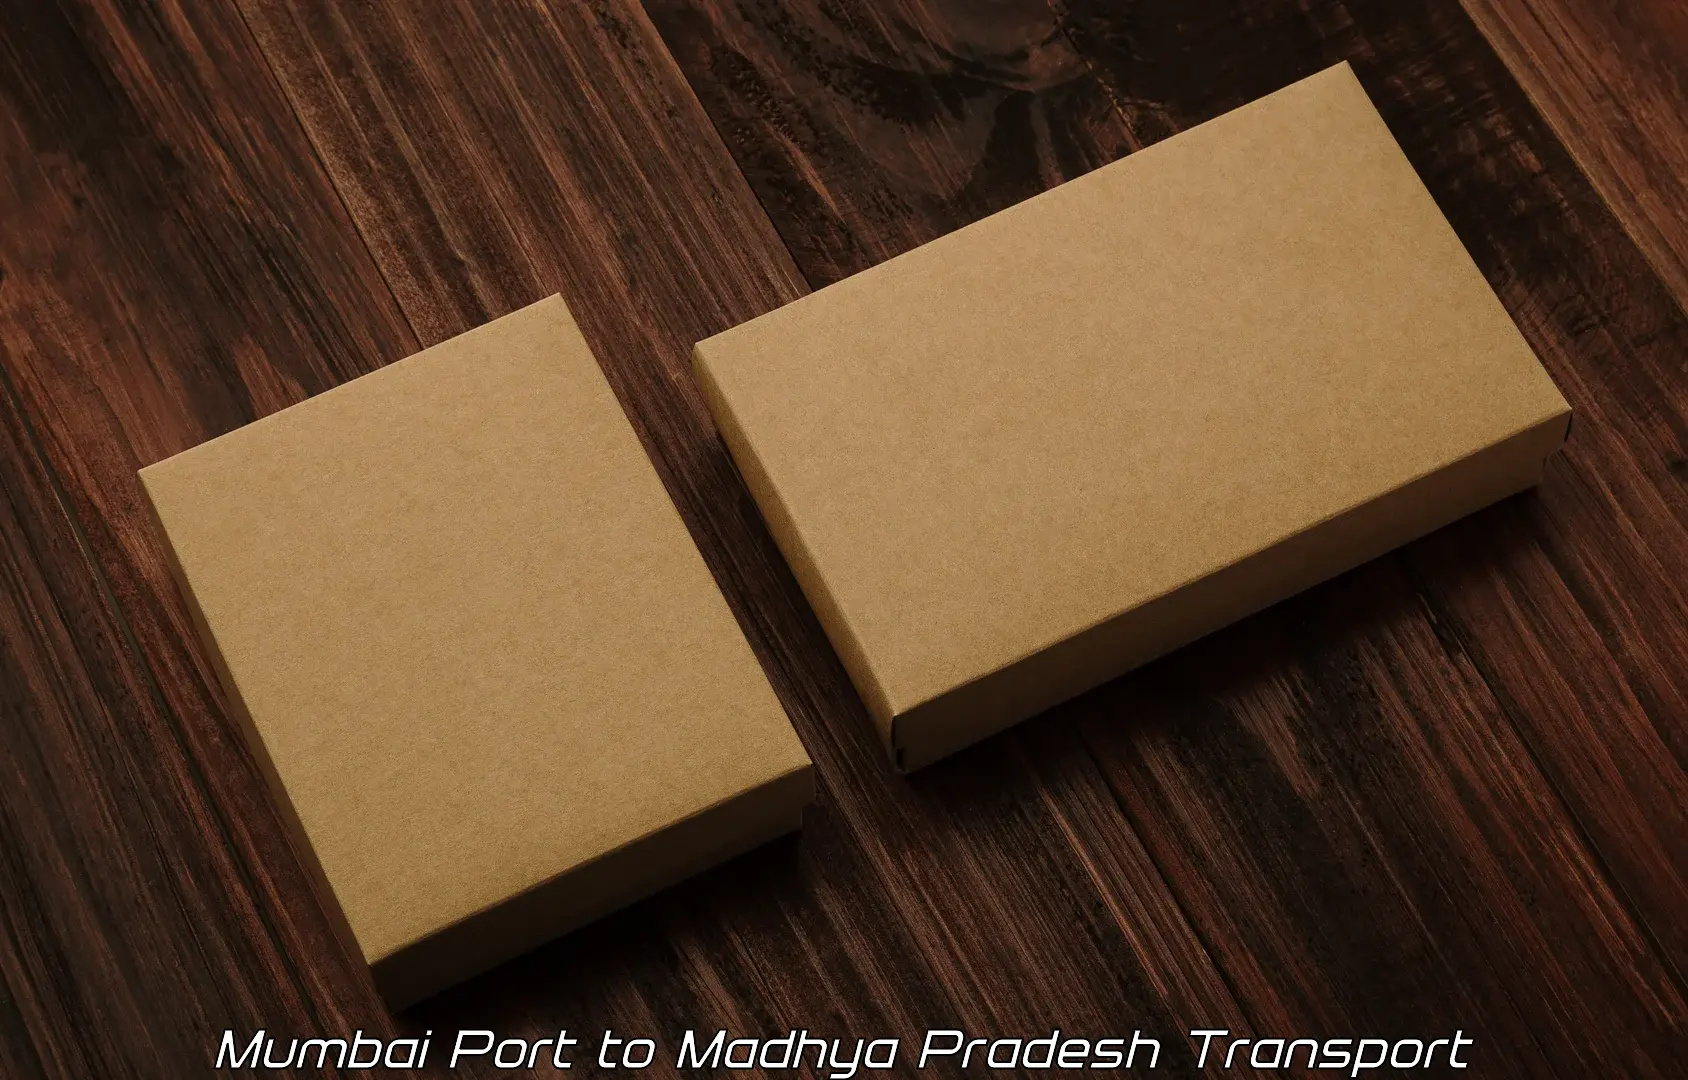 Goods transport services in Mumbai Port to Bajag